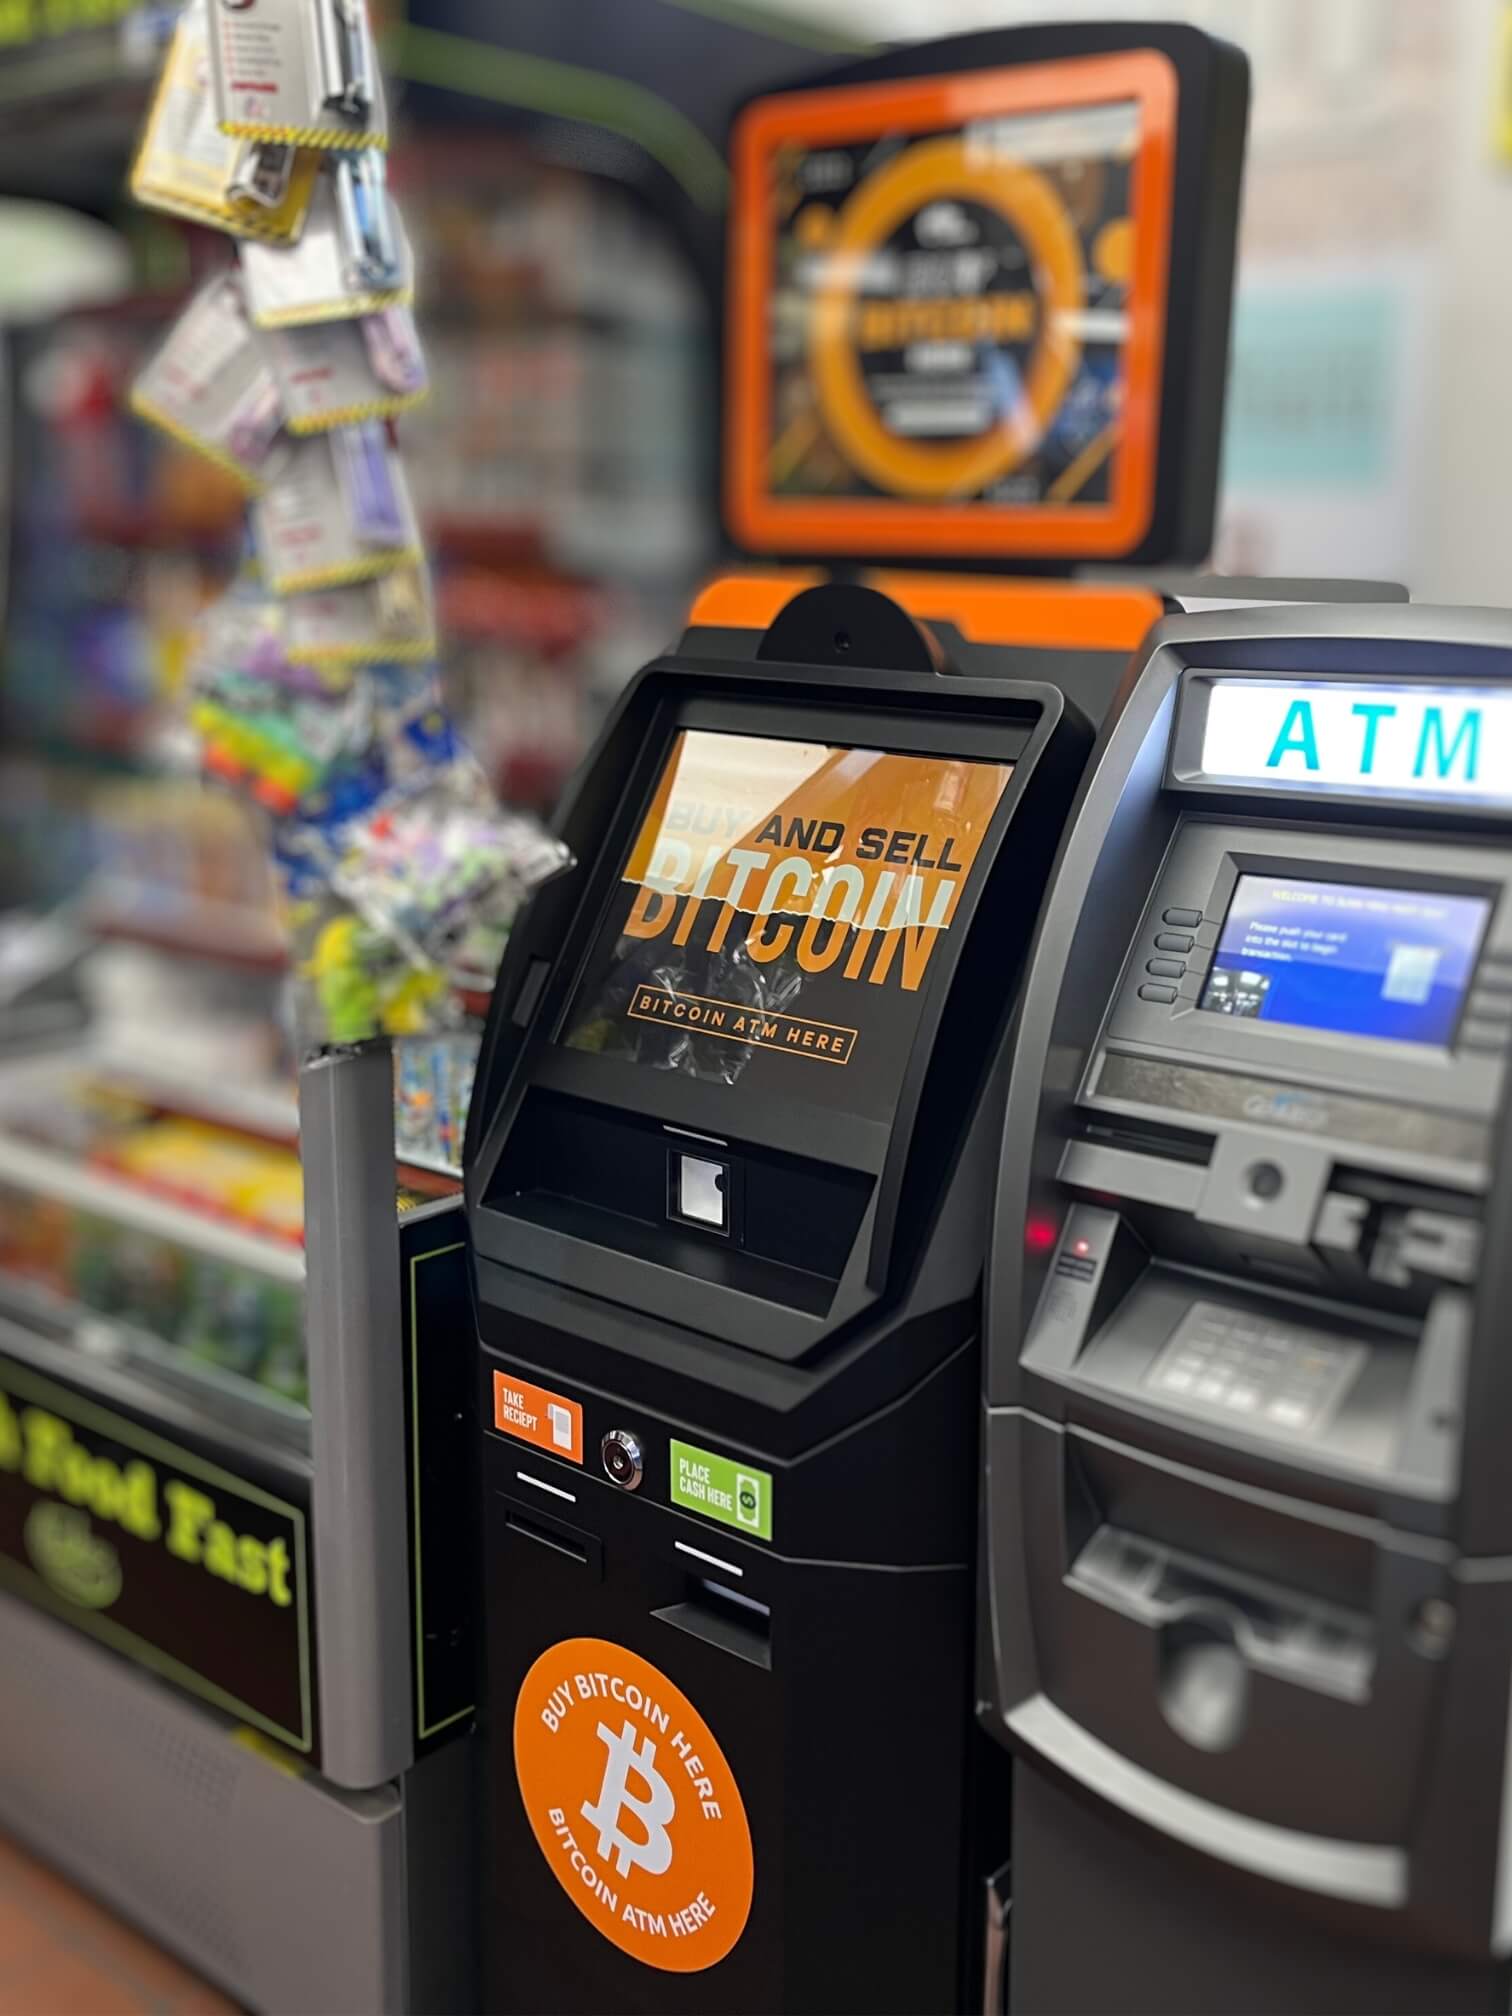 ChainBytes Bitcoin ATM with top screen for sale